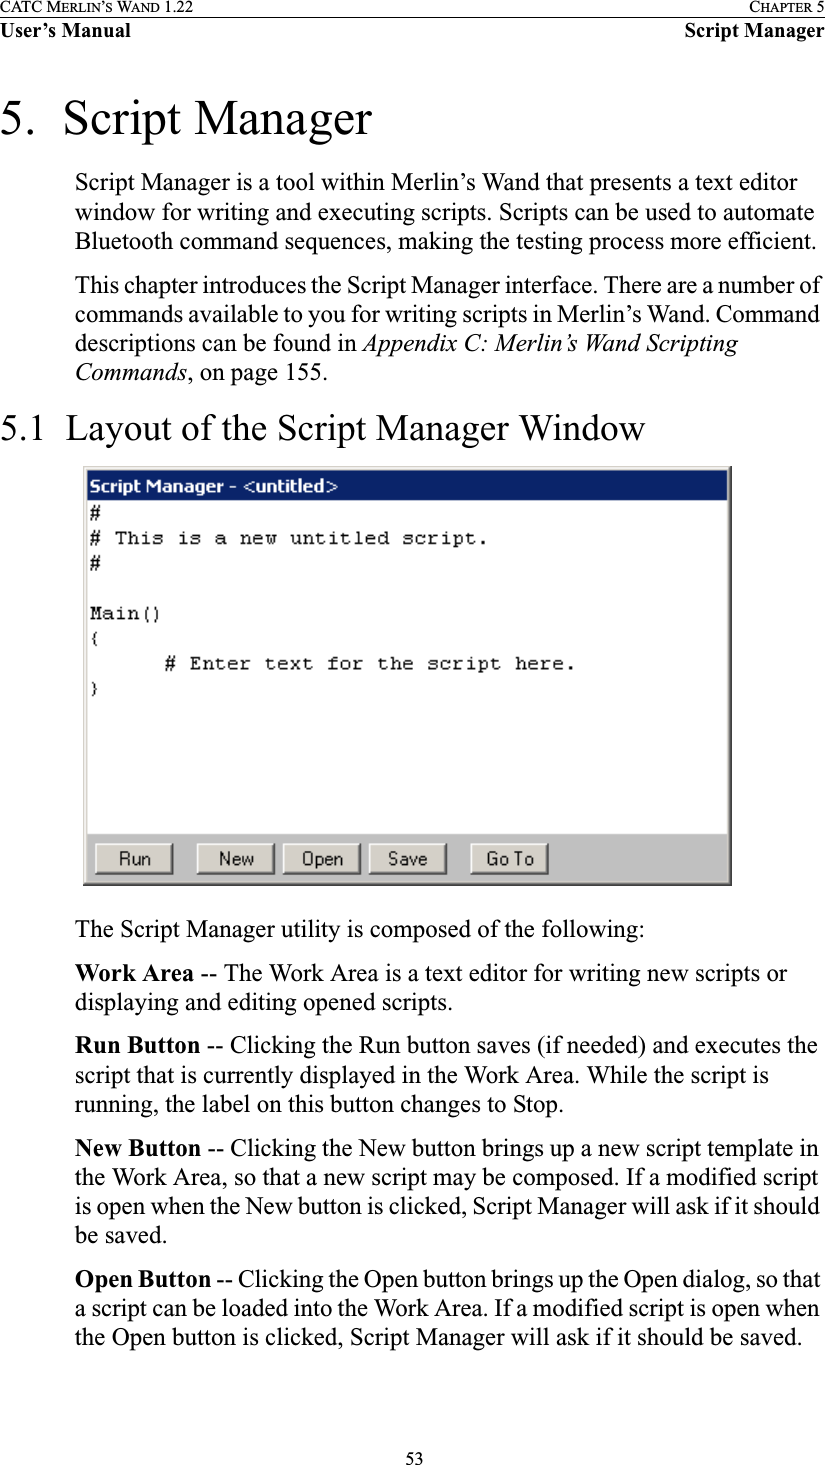  53CATC MERLIN’S WAND 1.22 CHAPTER 5User’s Manual Script Manager5.  Script ManagerScript Manager is a tool within Merlin’s Wand that presents a text editor window for writing and executing scripts. Scripts can be used to automate Bluetooth command sequences, making the testing process more efficient.This chapter introduces the Script Manager interface. There are a number of commands available to you for writing scripts in Merlin’s Wand. Command descriptions can be found in Appendix C: Merlin’s Wand Scripting Commands, on page 155. 5.1  Layout of the Script Manager WindowThe Script Manager utility is composed of the following:Work Area -- The Work Area is a text editor for writing new scripts or displaying and editing opened scripts.Run Button -- Clicking the Run button saves (if needed) and executes the script that is currently displayed in the Work Area. While the script is running, the label on this button changes to Stop.New Button -- Clicking the New button brings up a new script template in the Work Area, so that a new script may be composed. If a modified script is open when the New button is clicked, Script Manager will ask if it should be saved.Open Button -- Clicking the Open button brings up the Open dialog, so that a script can be loaded into the Work Area. If a modified script is open when the Open button is clicked, Script Manager will ask if it should be saved.